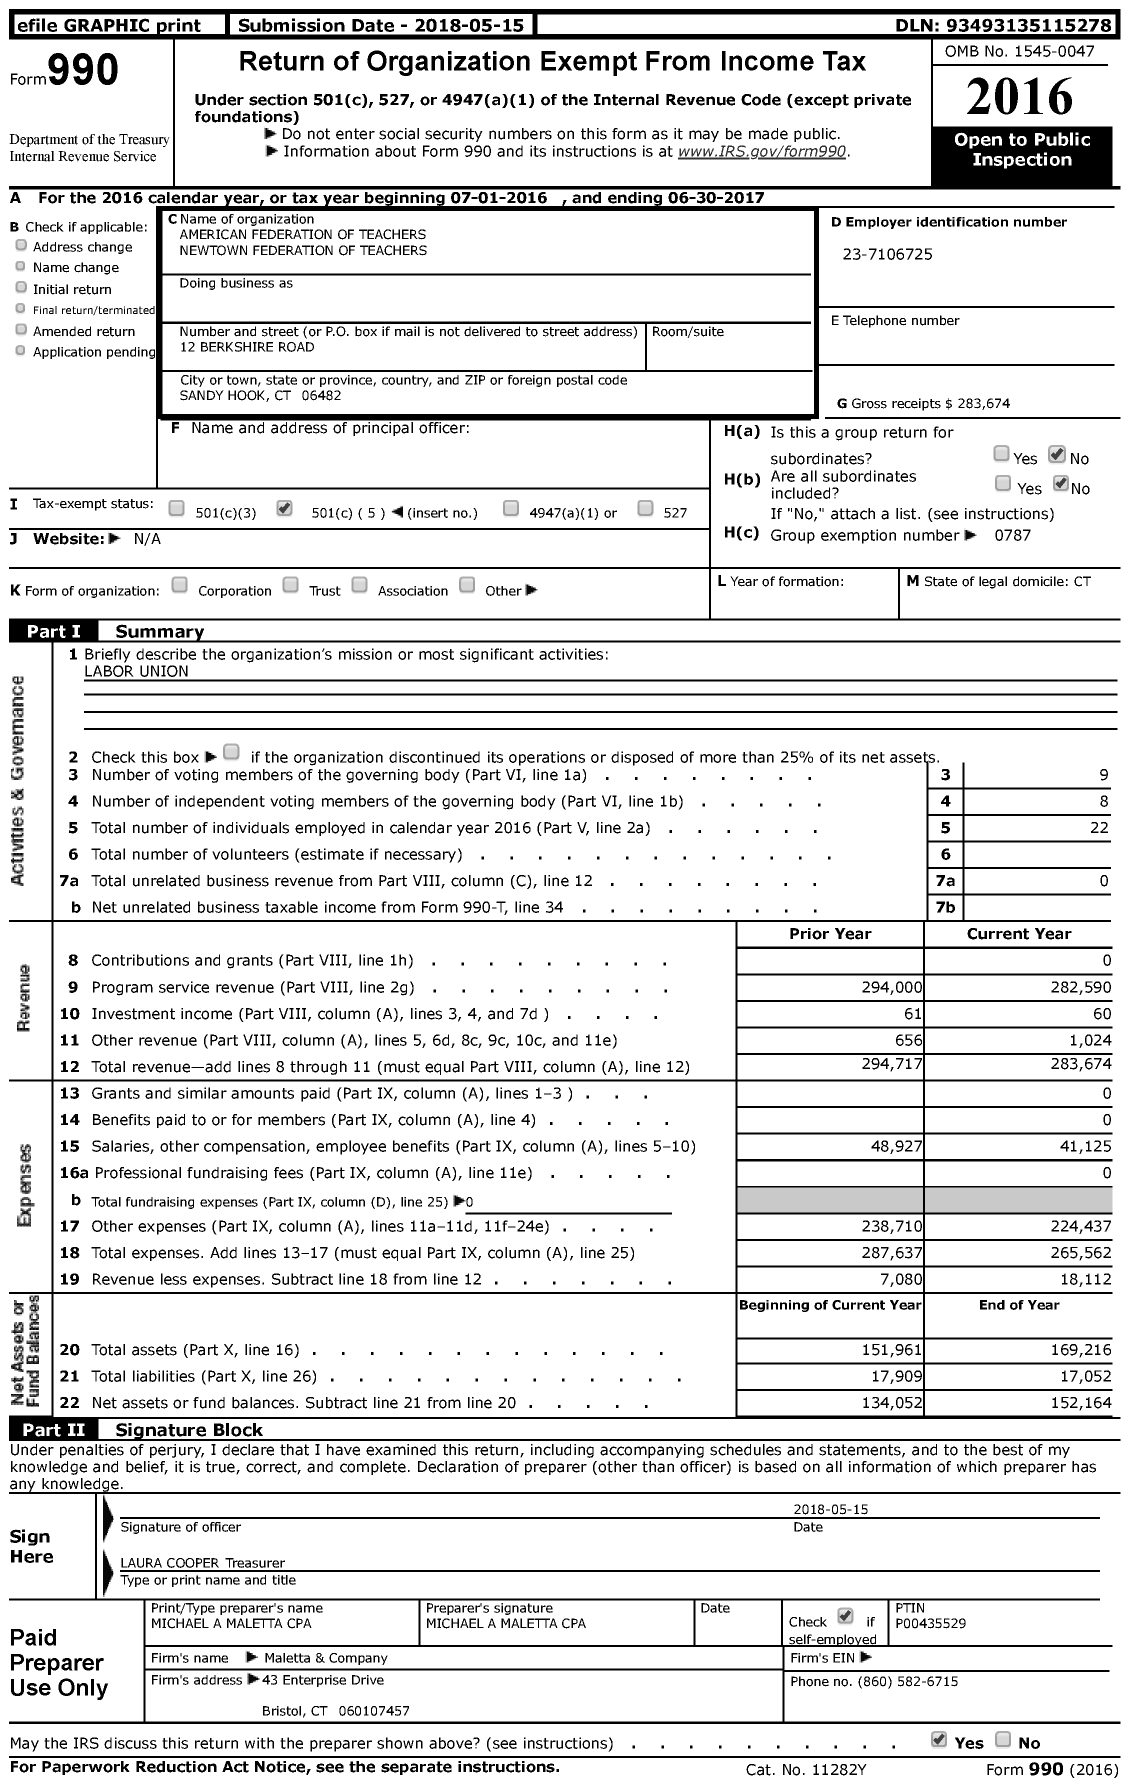 Image of first page of 2016 Form 990 for American Federation of Teachers Newtown Federation of Teachers